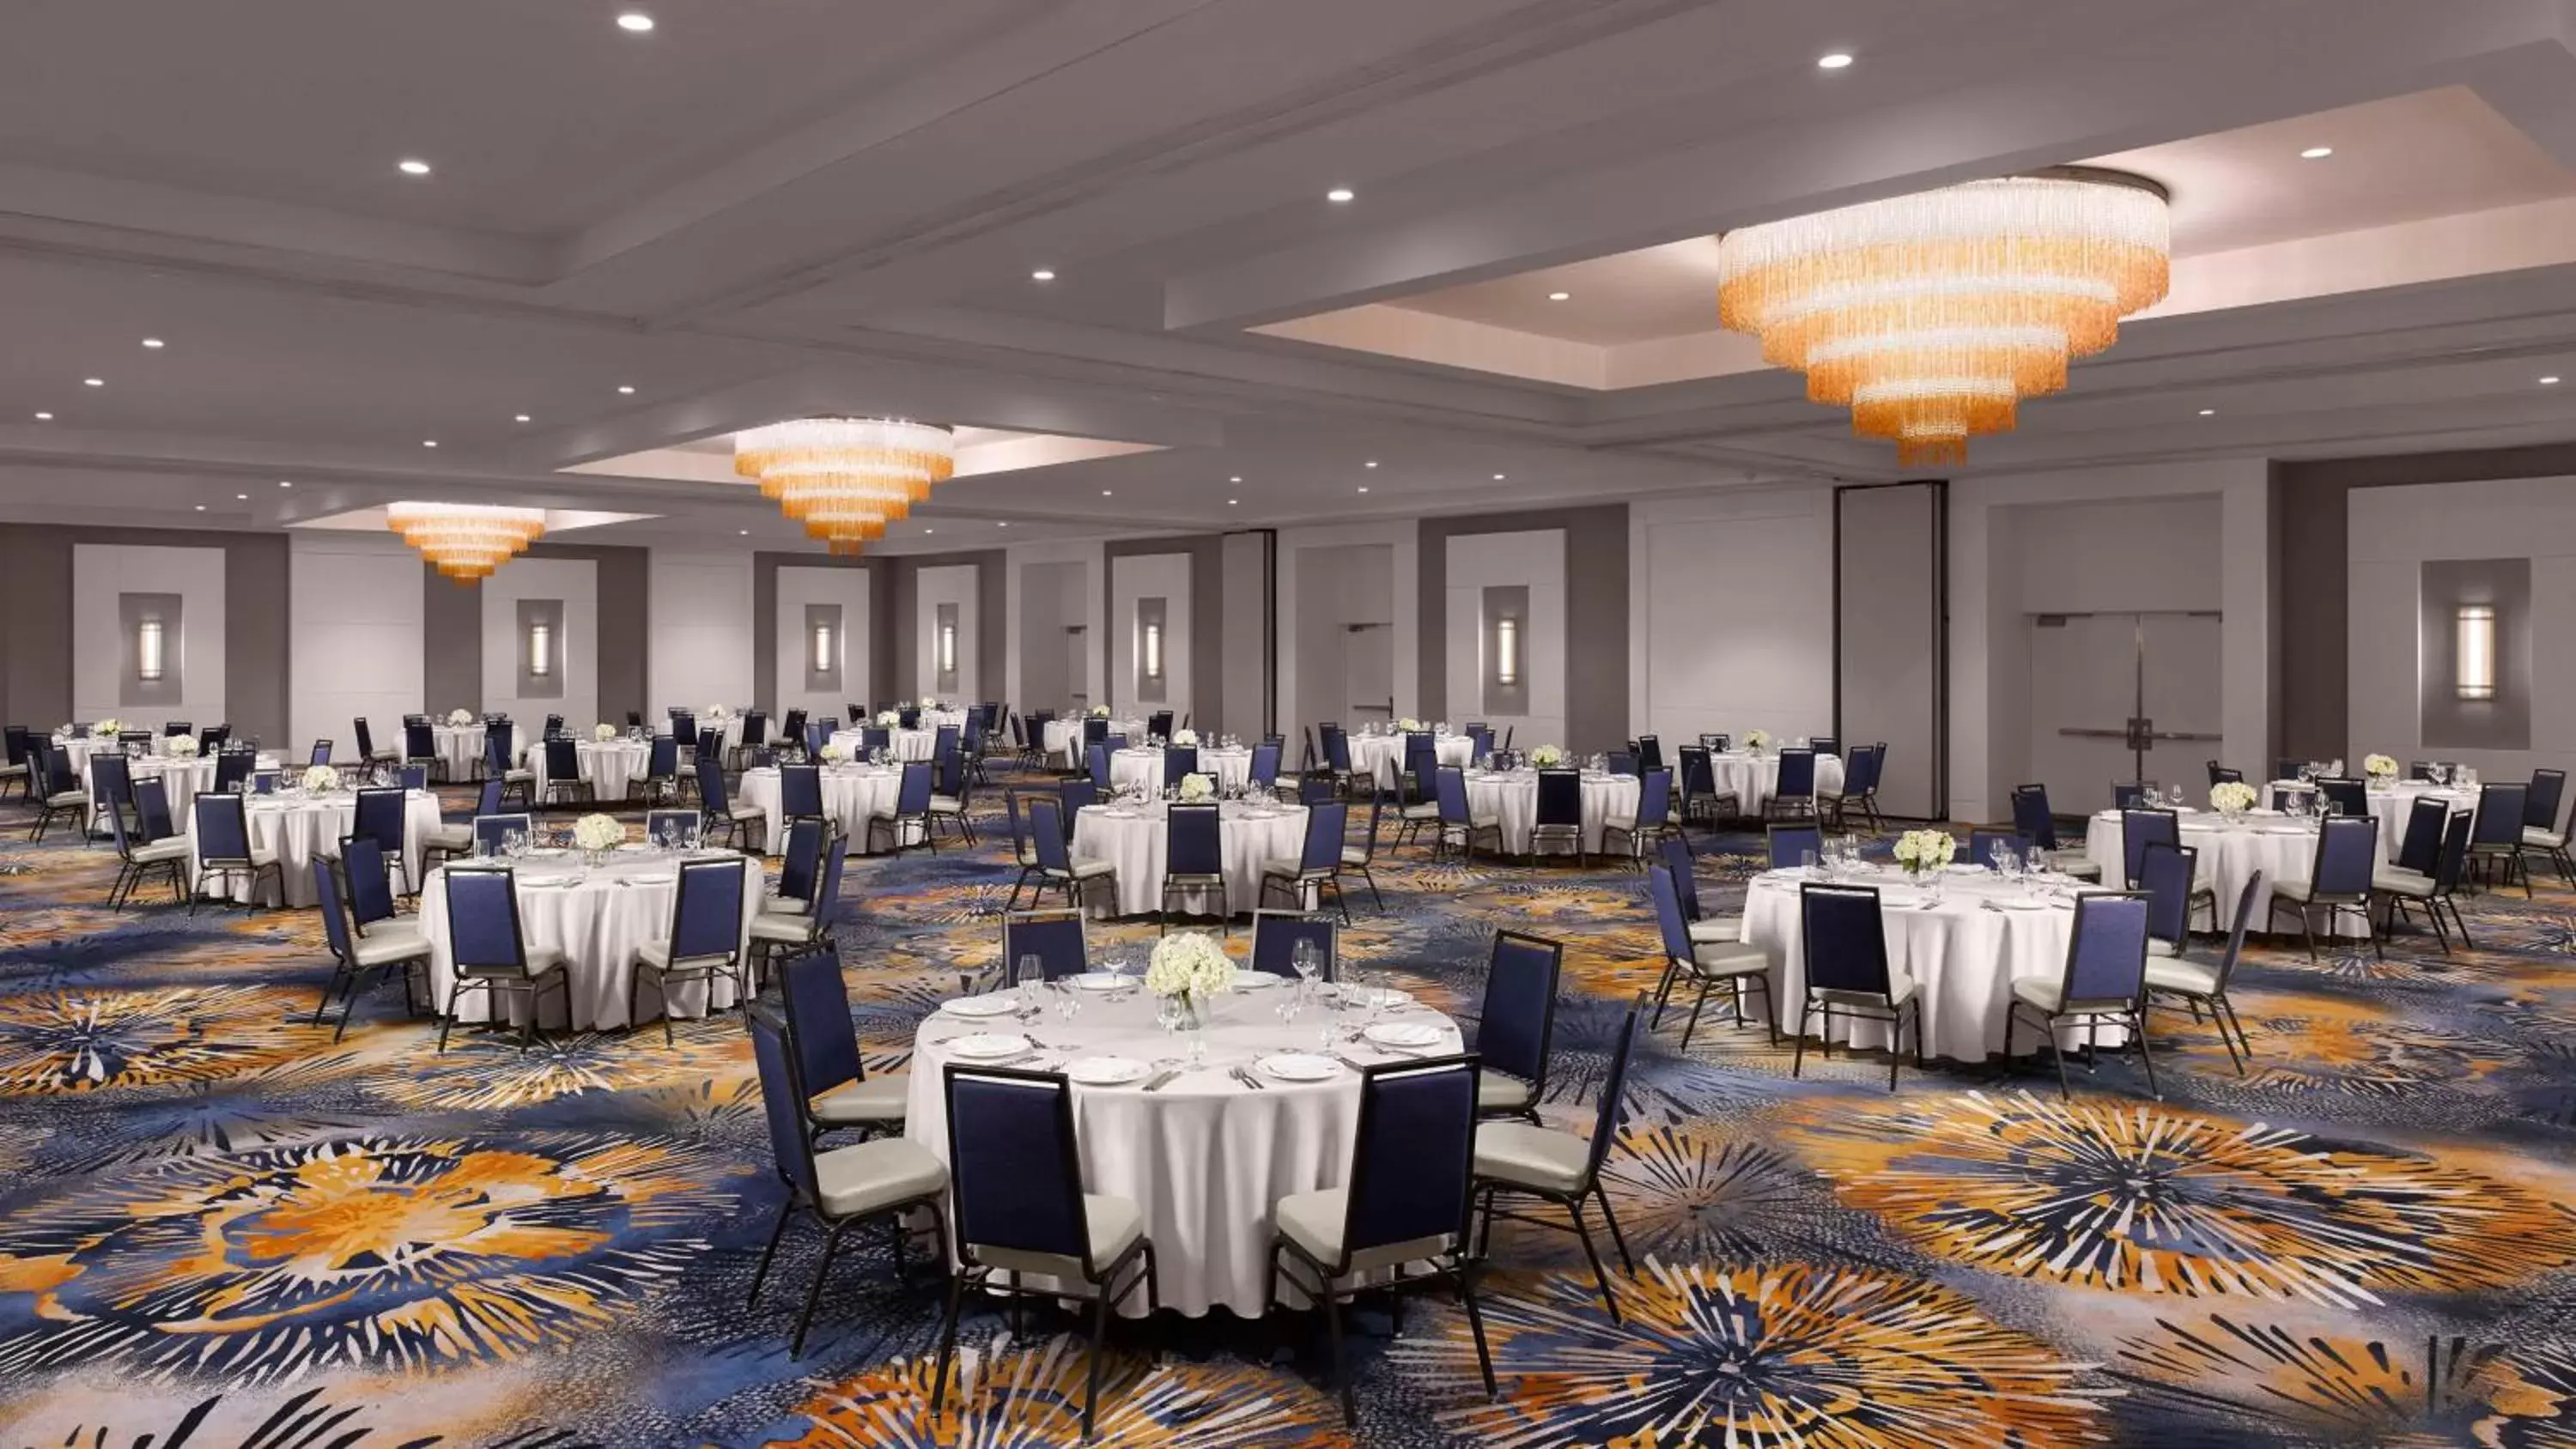 Meeting/conference room, Banquet Facilities in Hilton Fort Lauderdale Marina